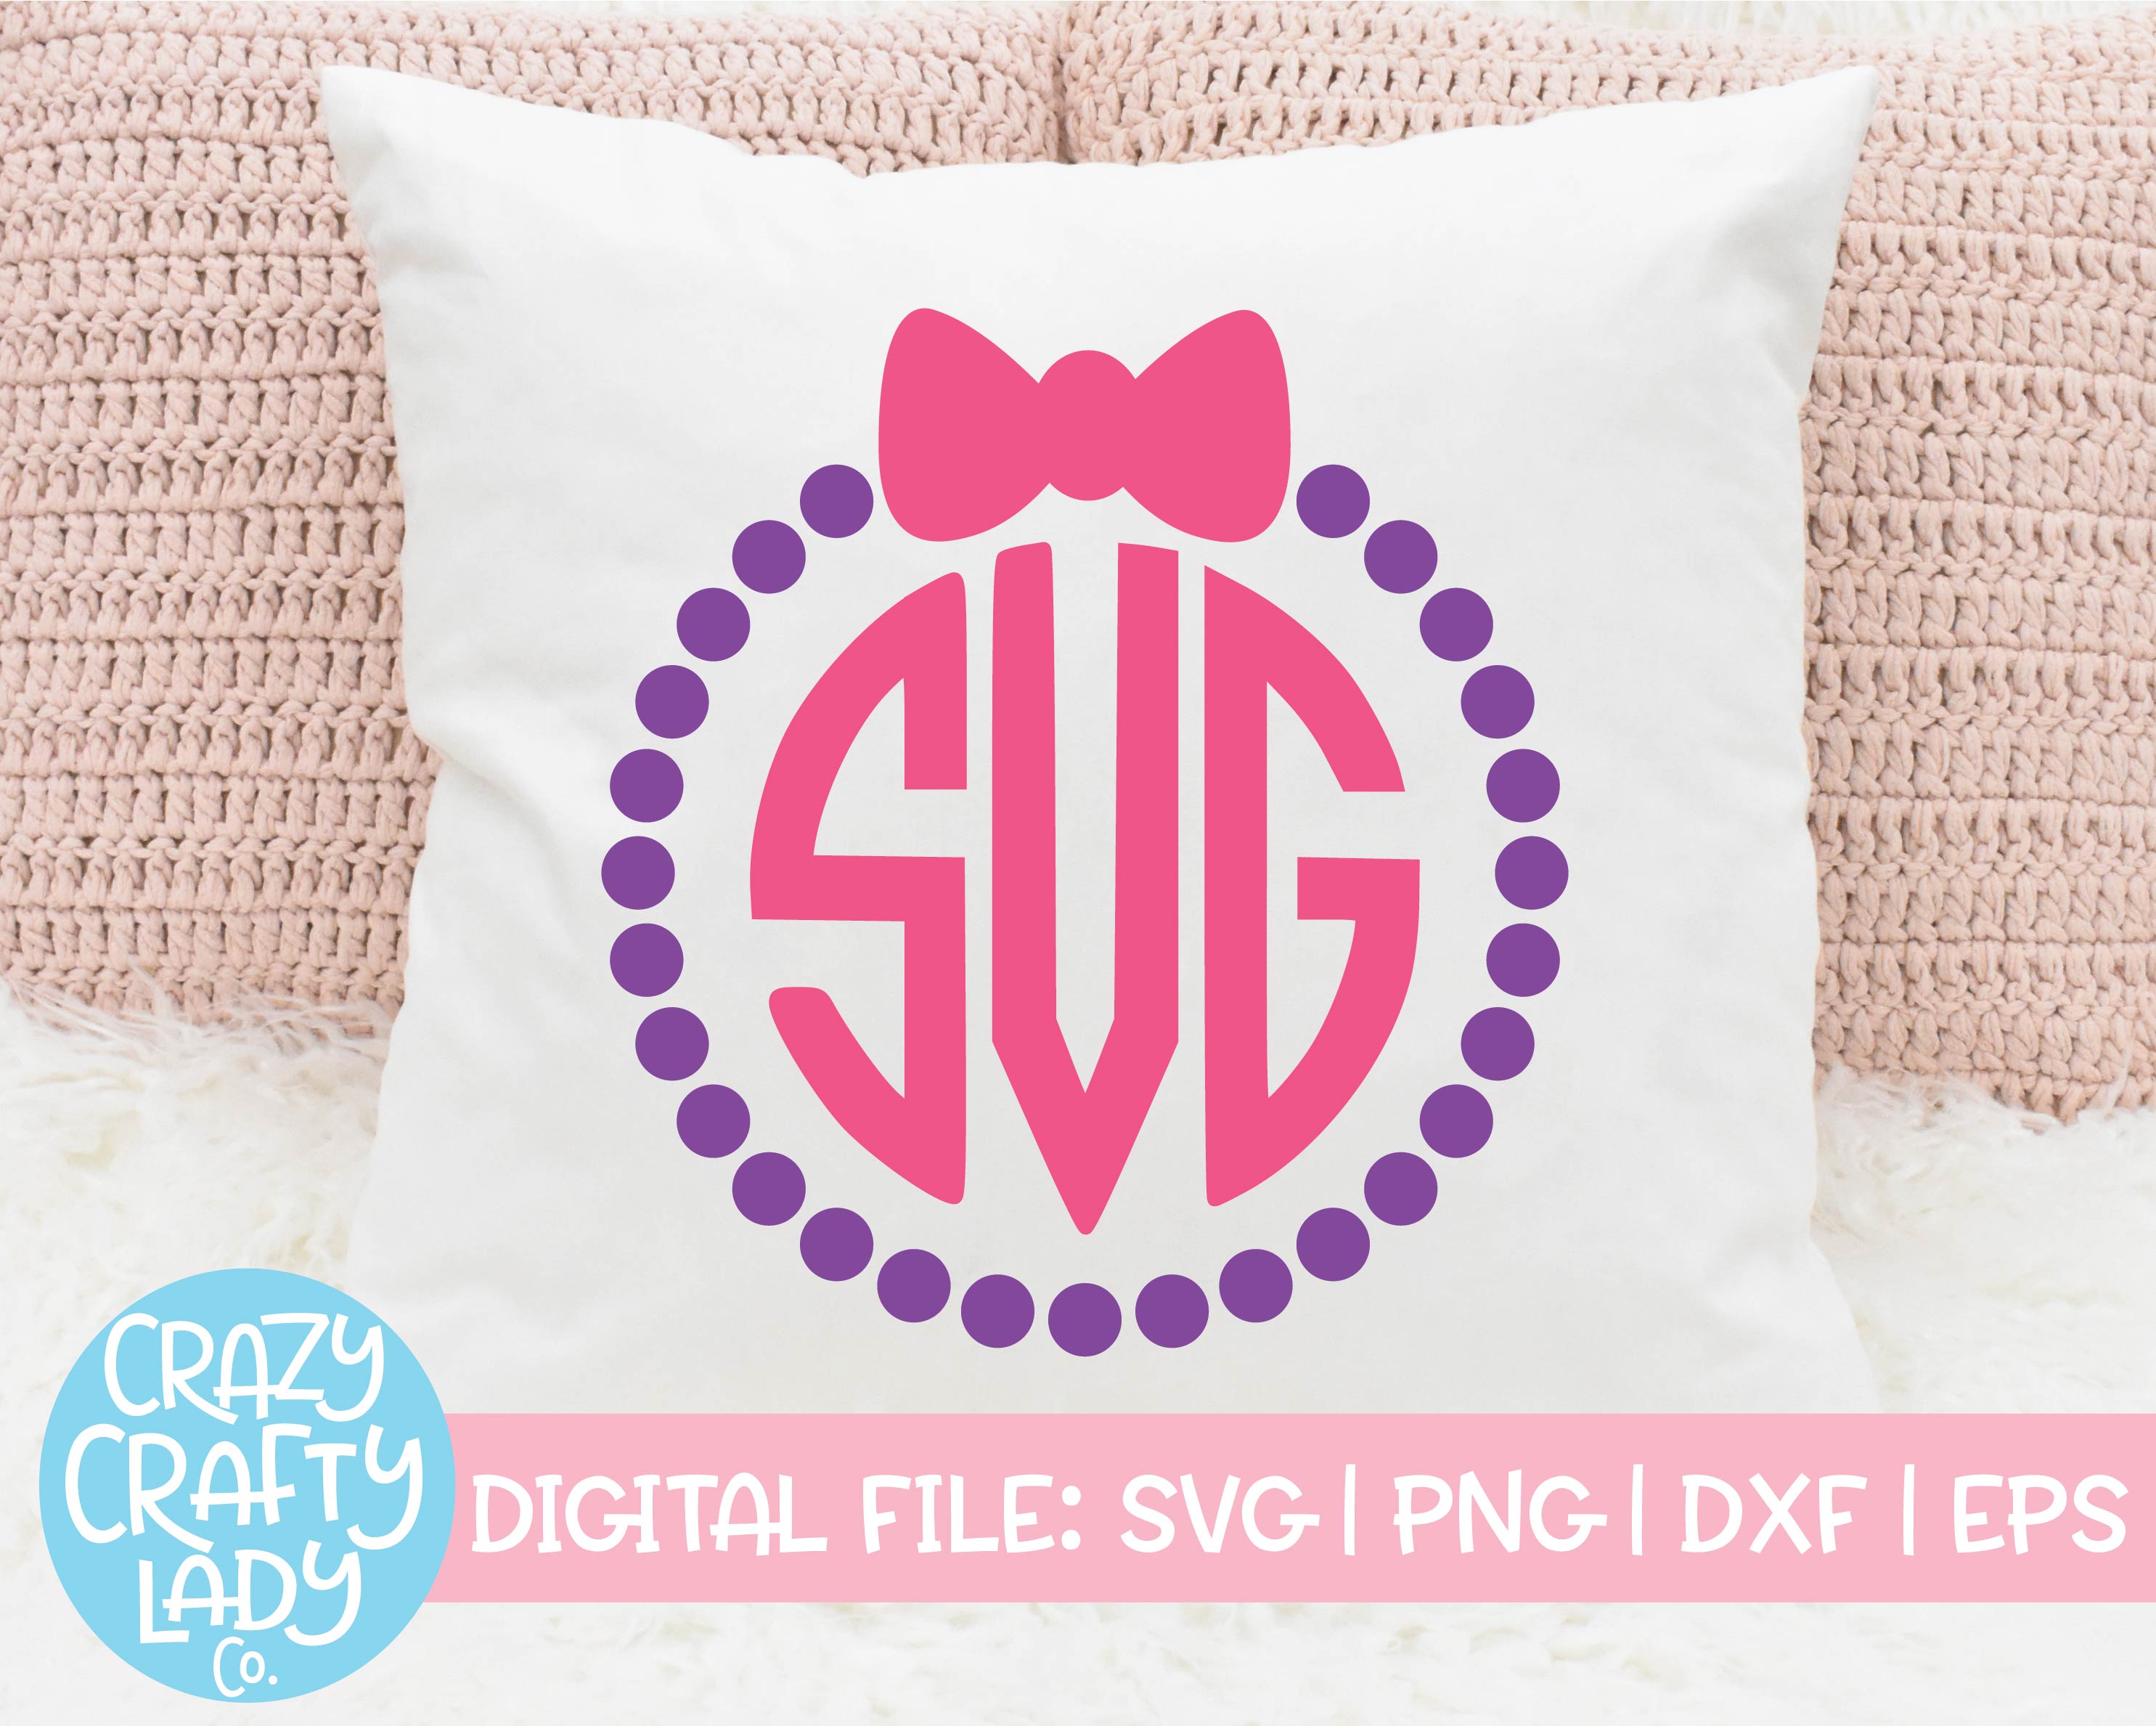 Circle Monogram Frame #3 with Bow SVG - Free SVG files